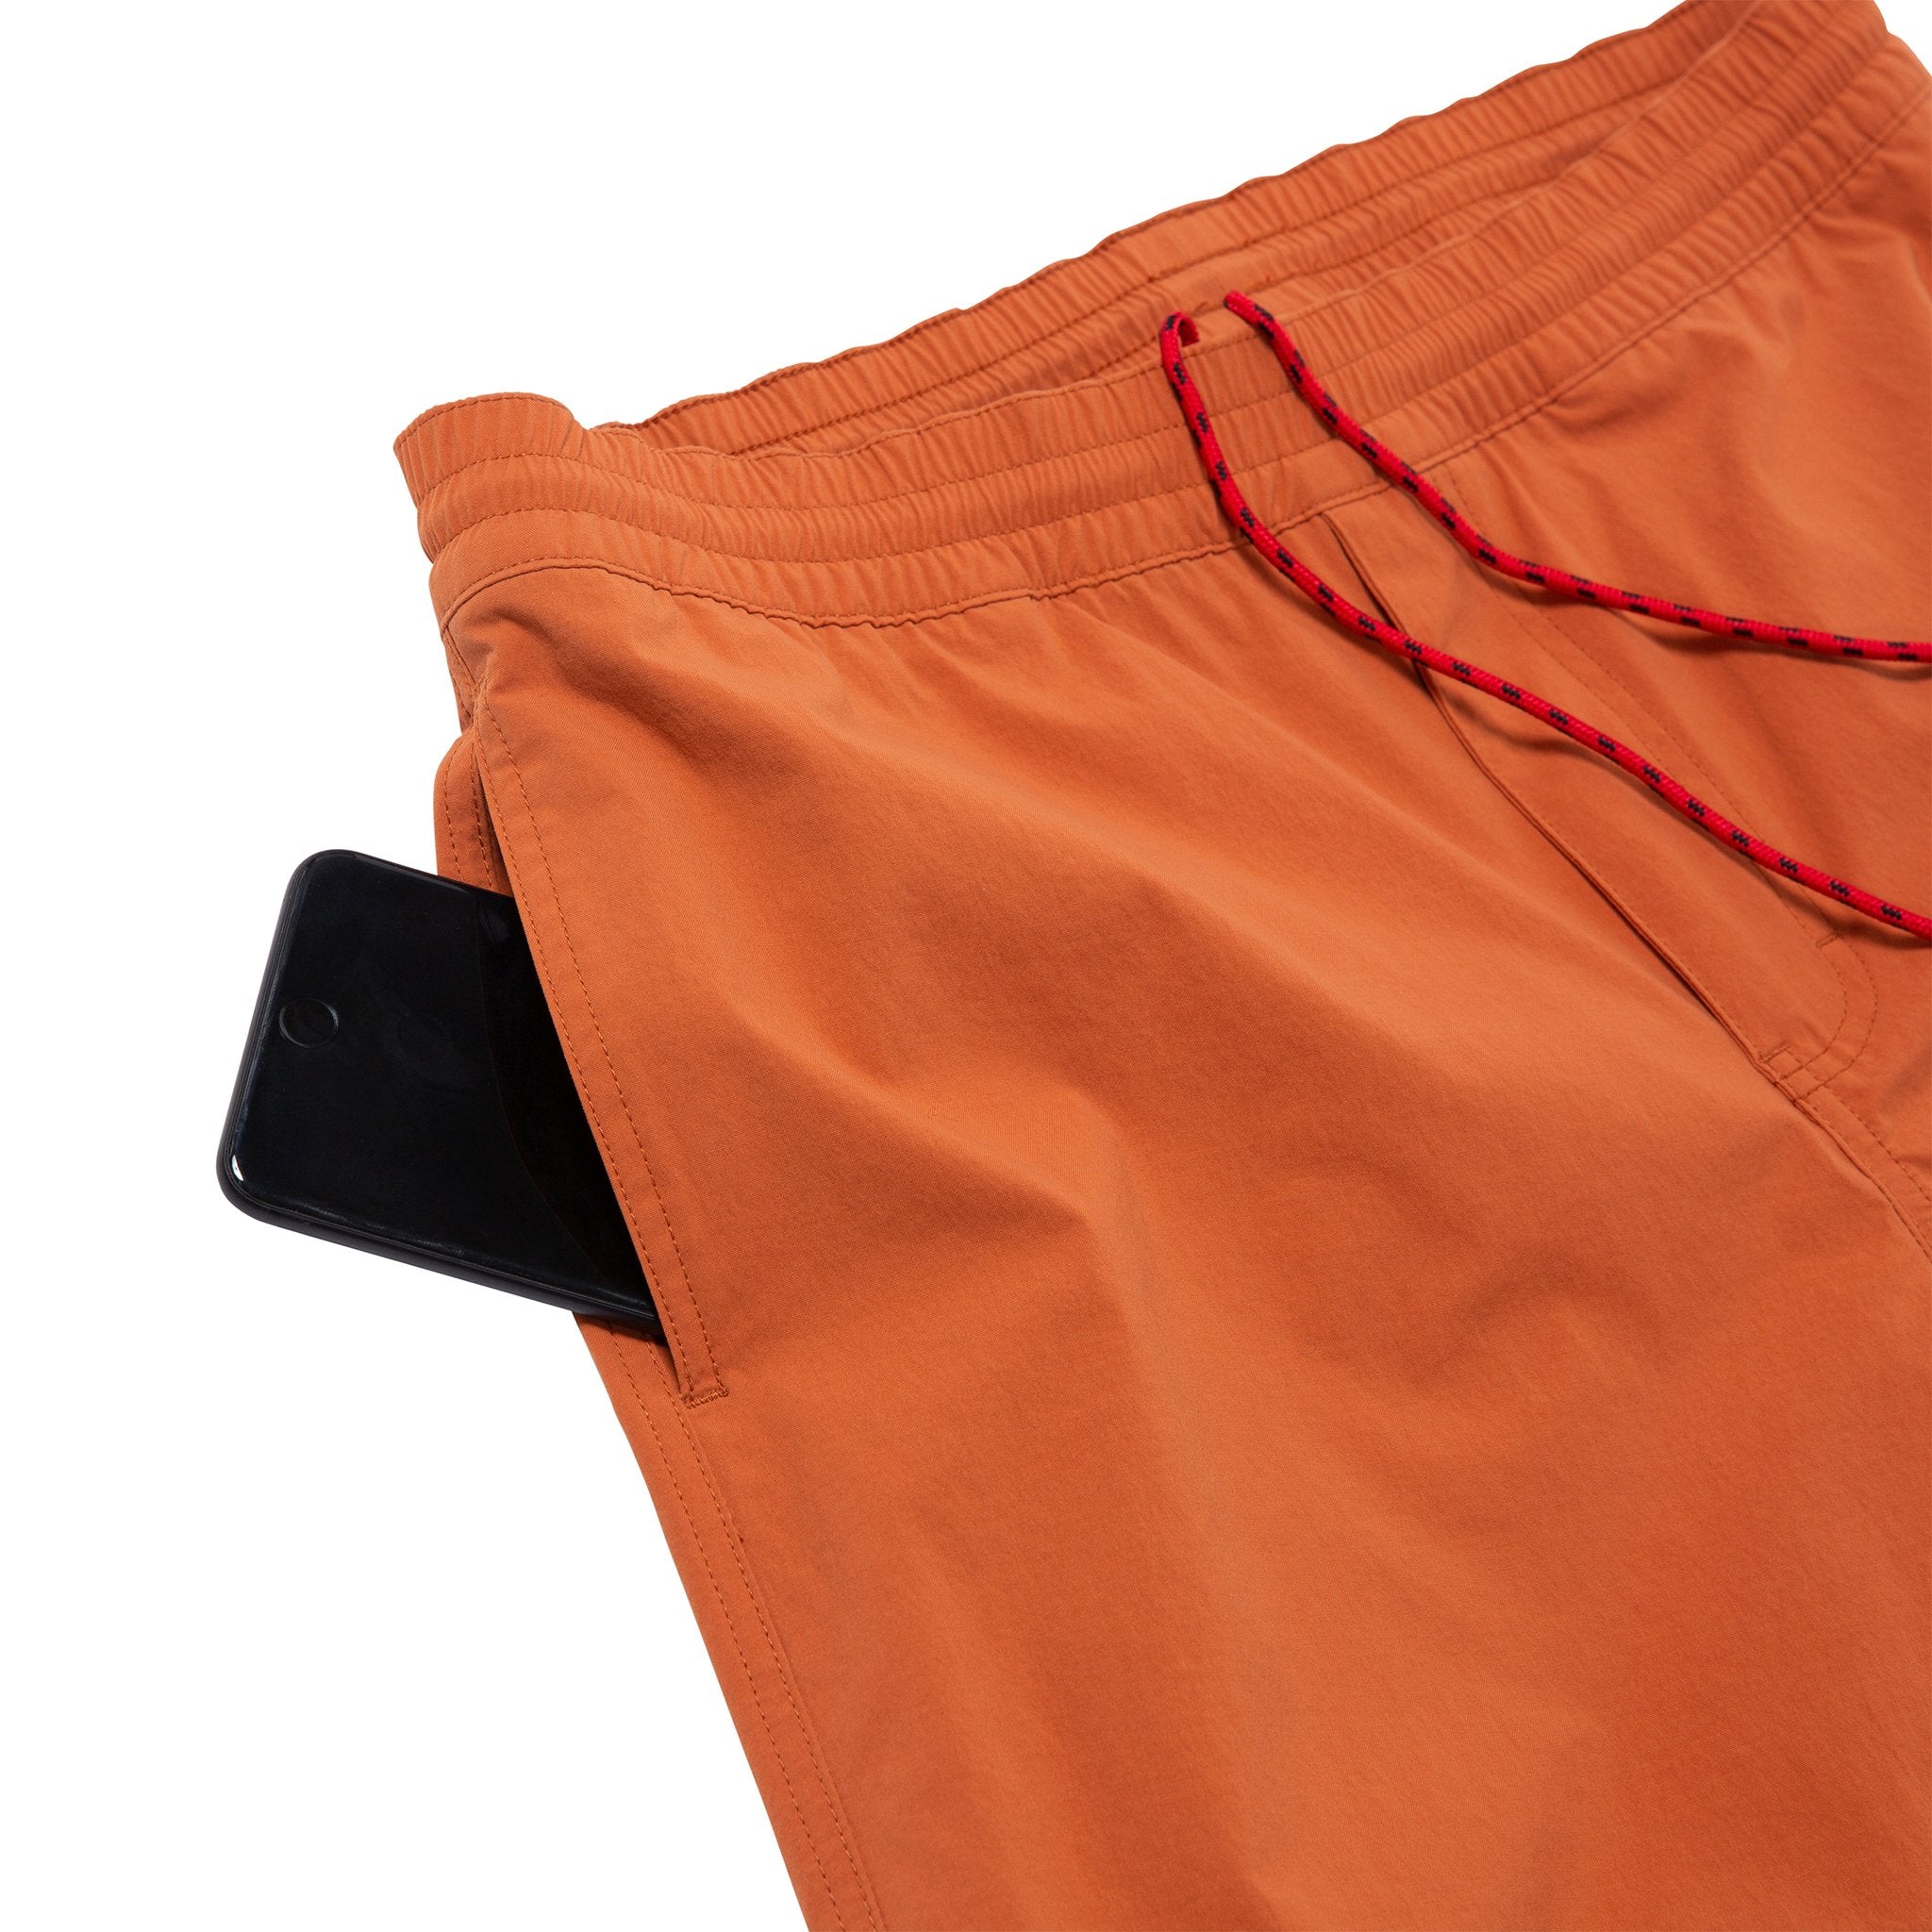 Detail shot of Topo Designs Men's Global Shorts in Clay showing mesh-lined side seam pocket